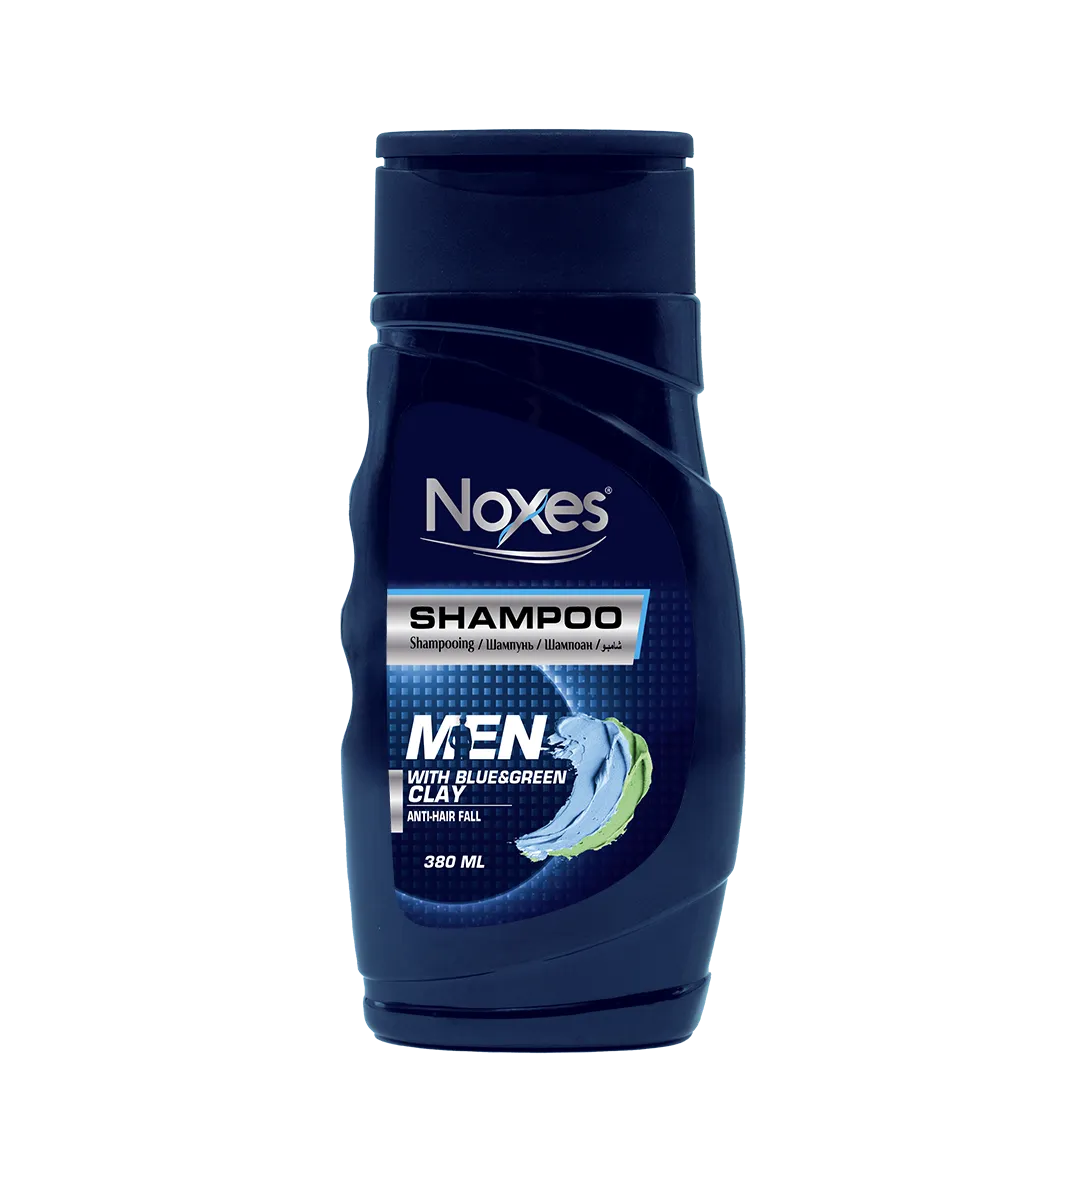 NOXES 380 ML SHAMPOO FOR MEN WITH BLUE&GREEN CLAY